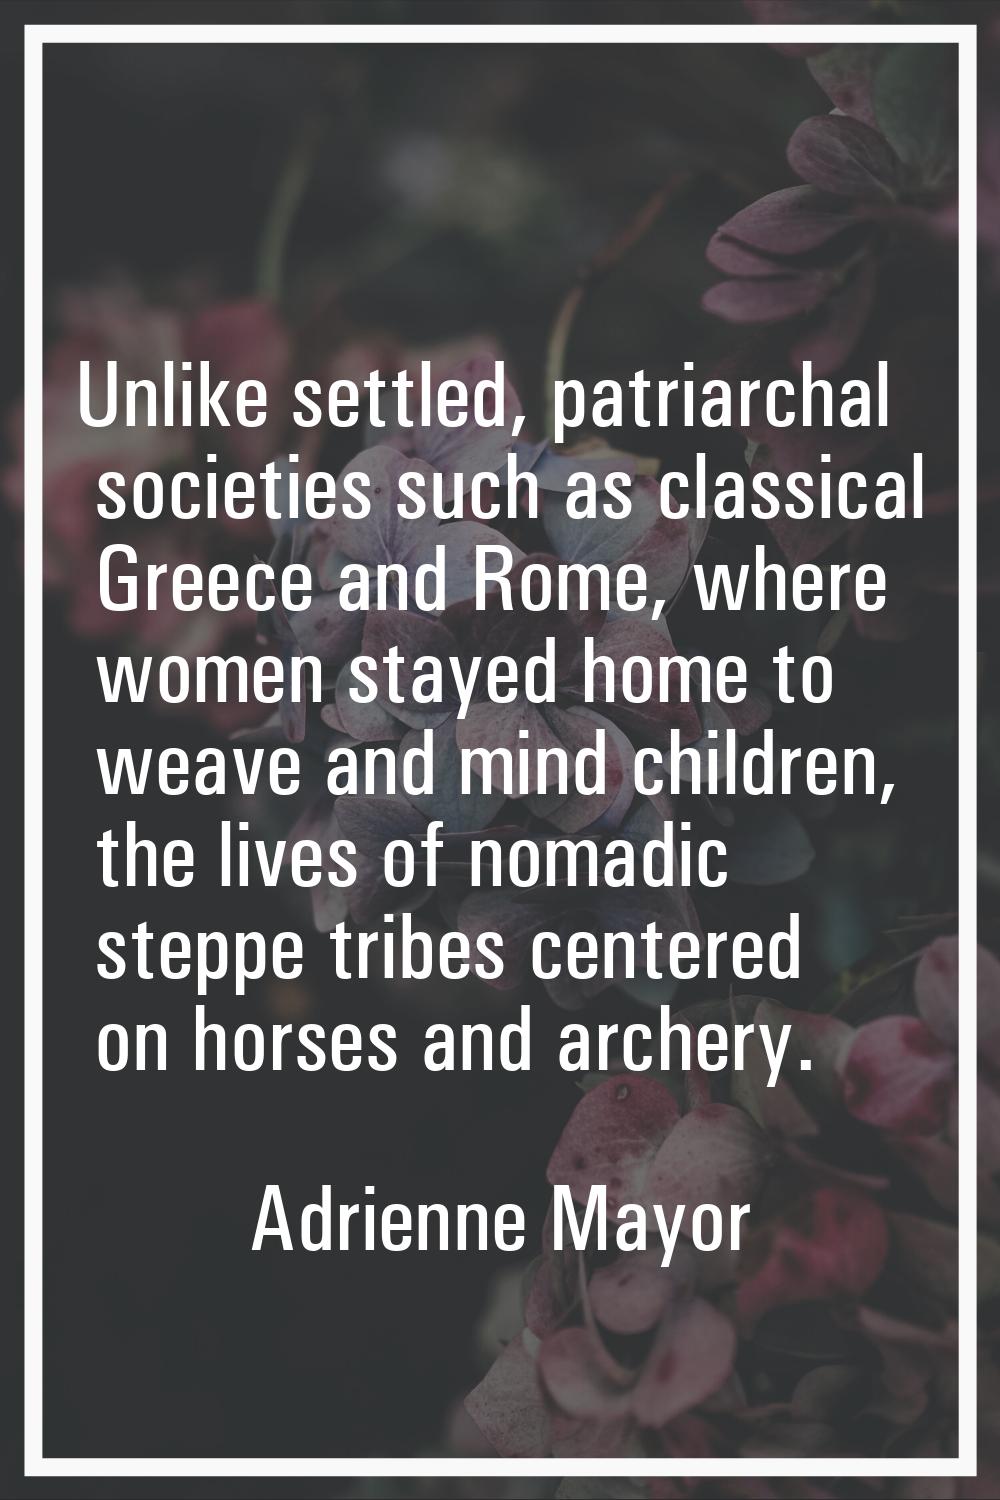 Unlike settled, patriarchal societies such as classical Greece and Rome, where women stayed home to